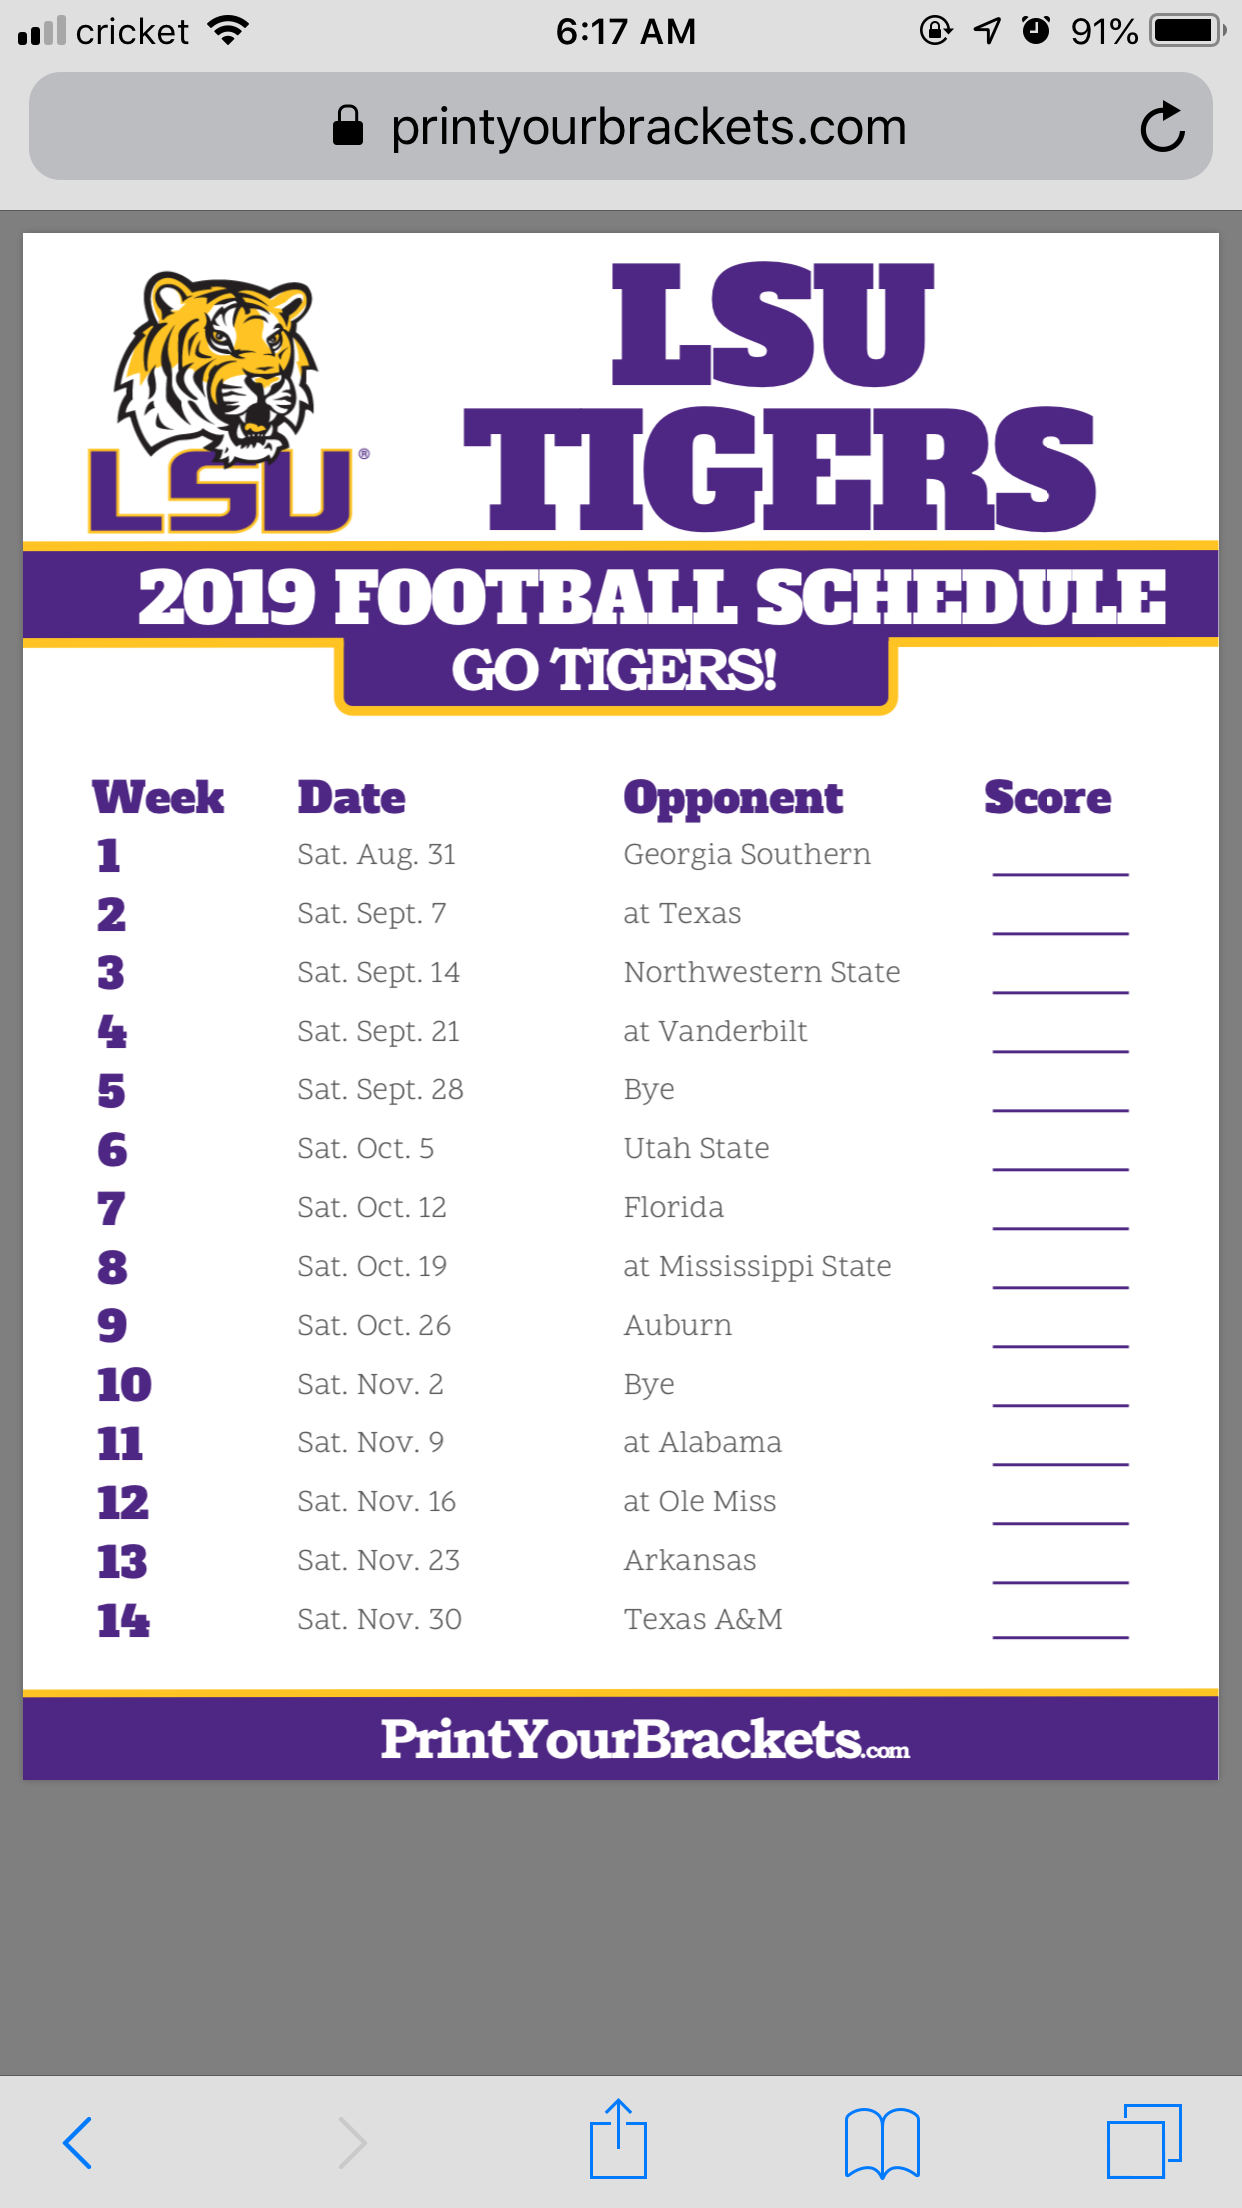 Can Someone Please Share 2019 LSU Football Schedule 